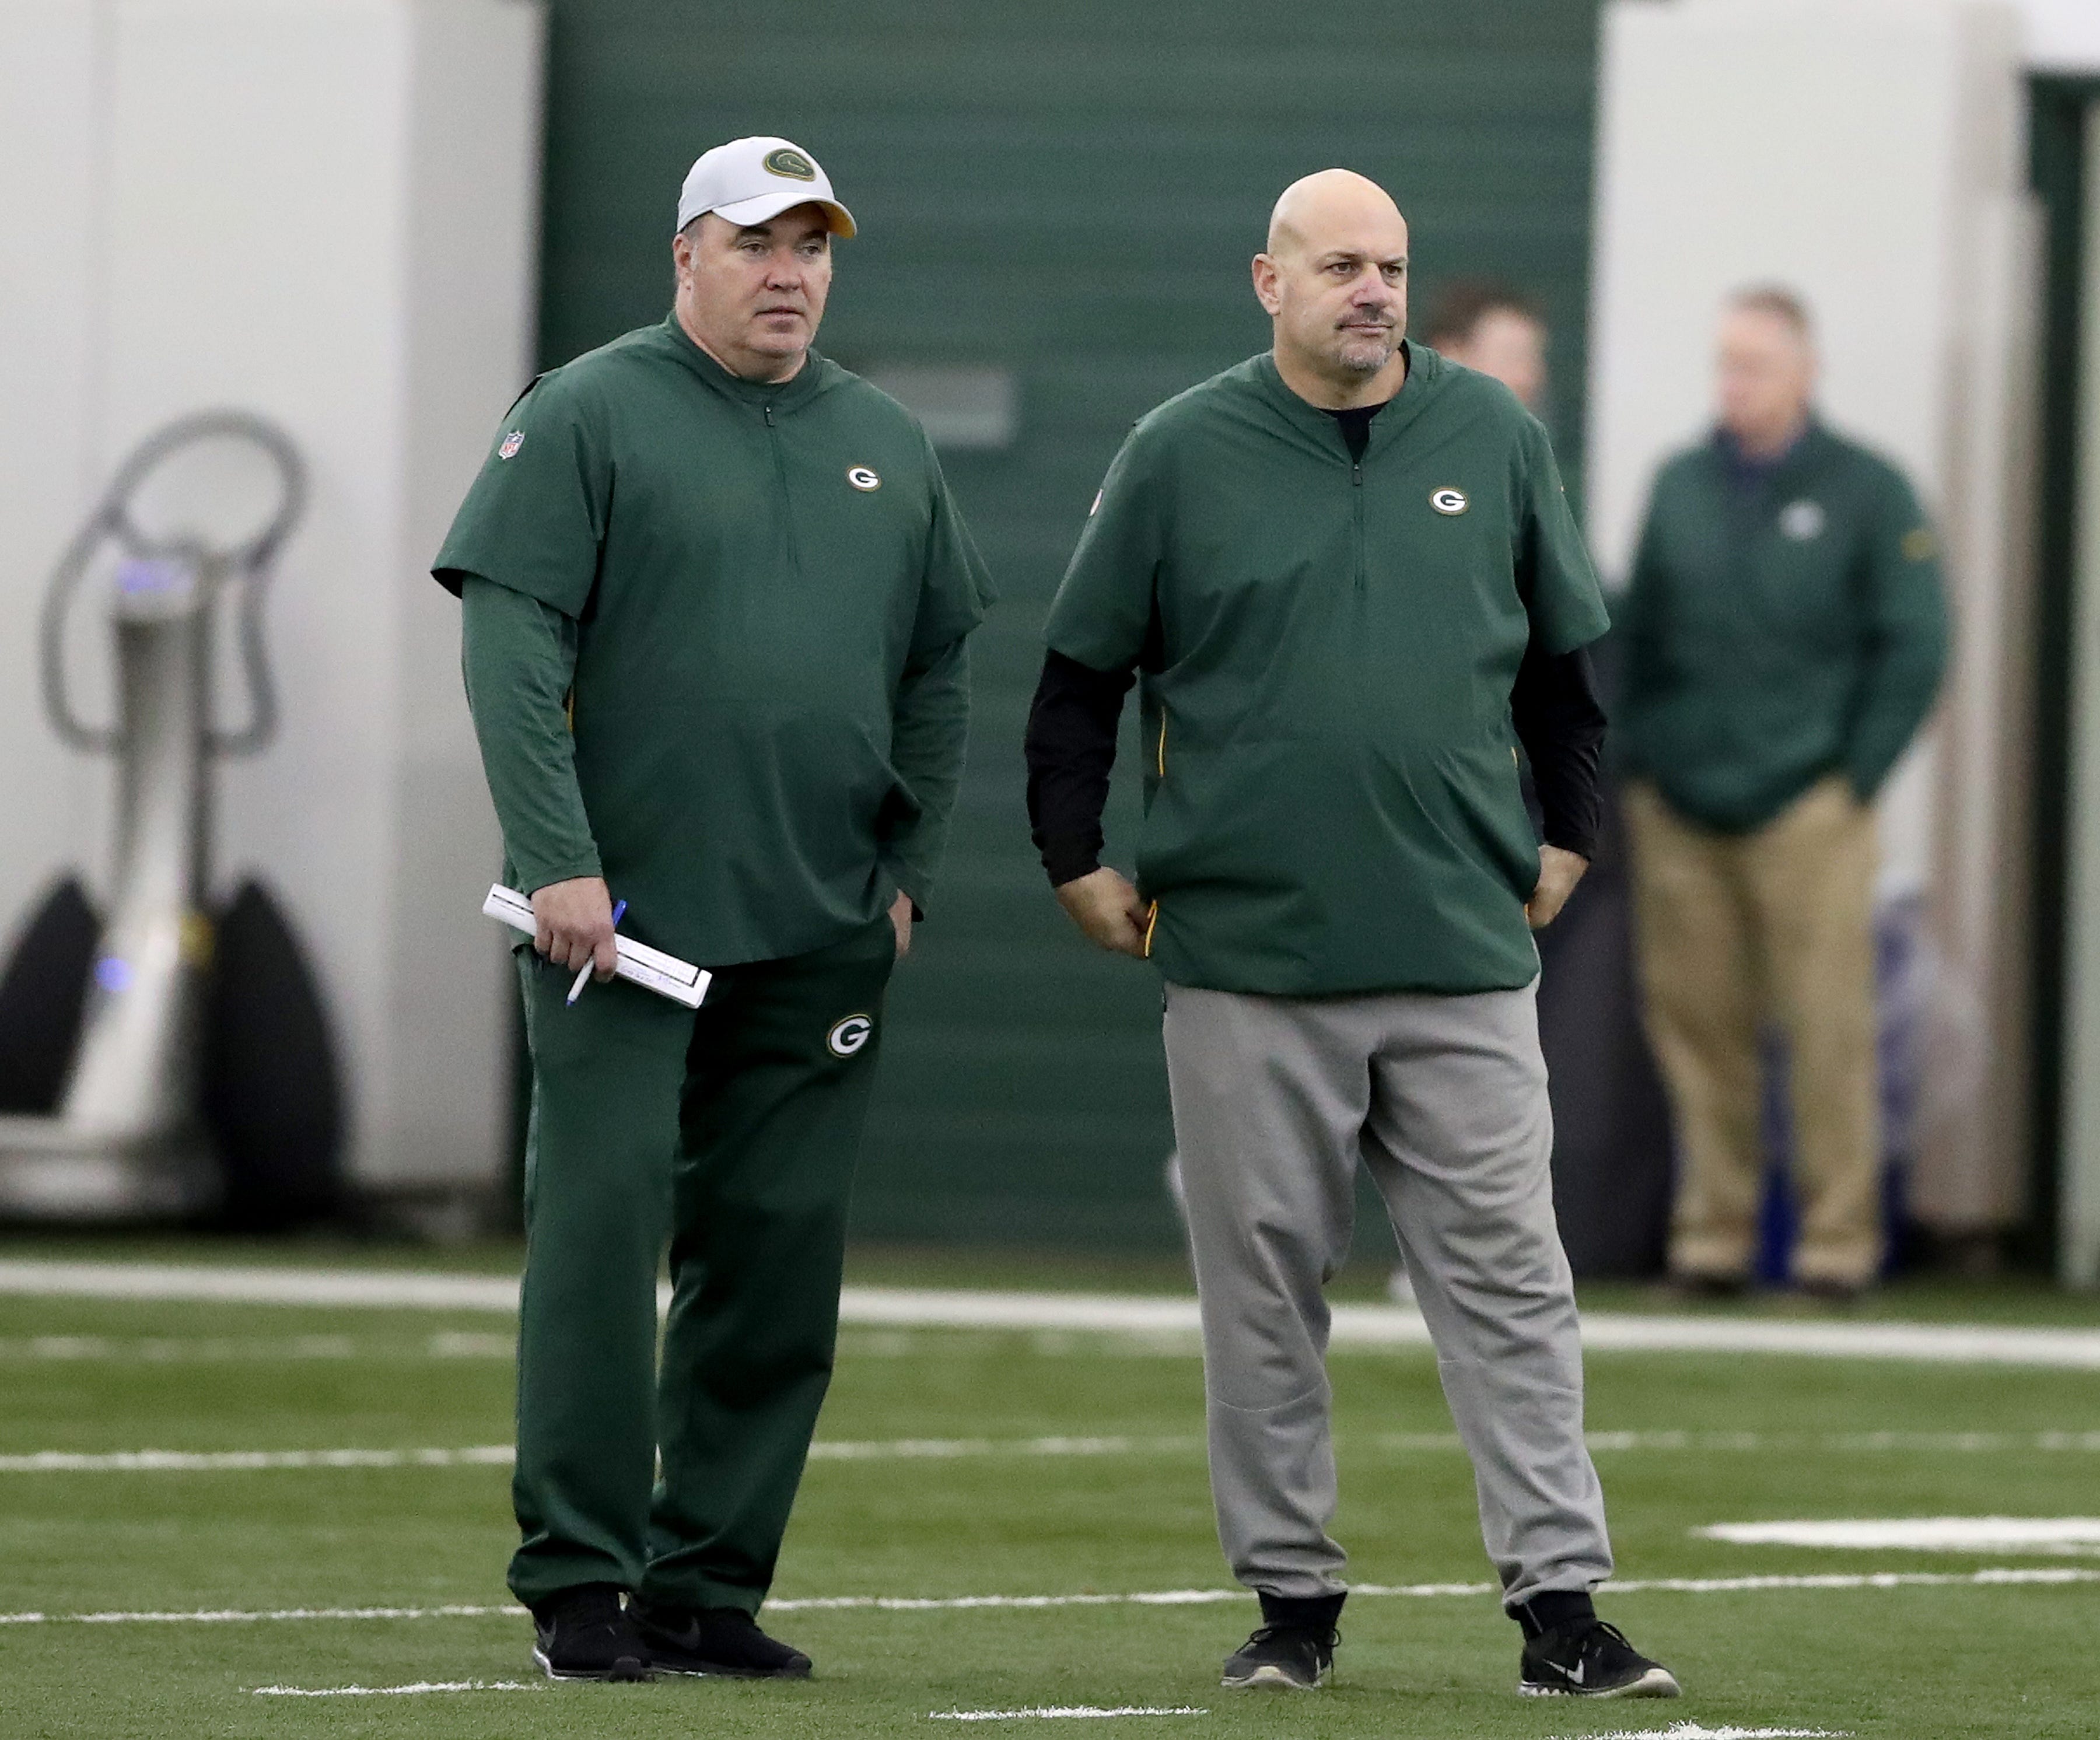 Now former Green Bay Packers head coach Mike McCarthy looks on with defensive coordinator Mike Pettine during practice inside the Hutson Center on Thursday, October 11, 2018 in Ashwaubenon, Wis.